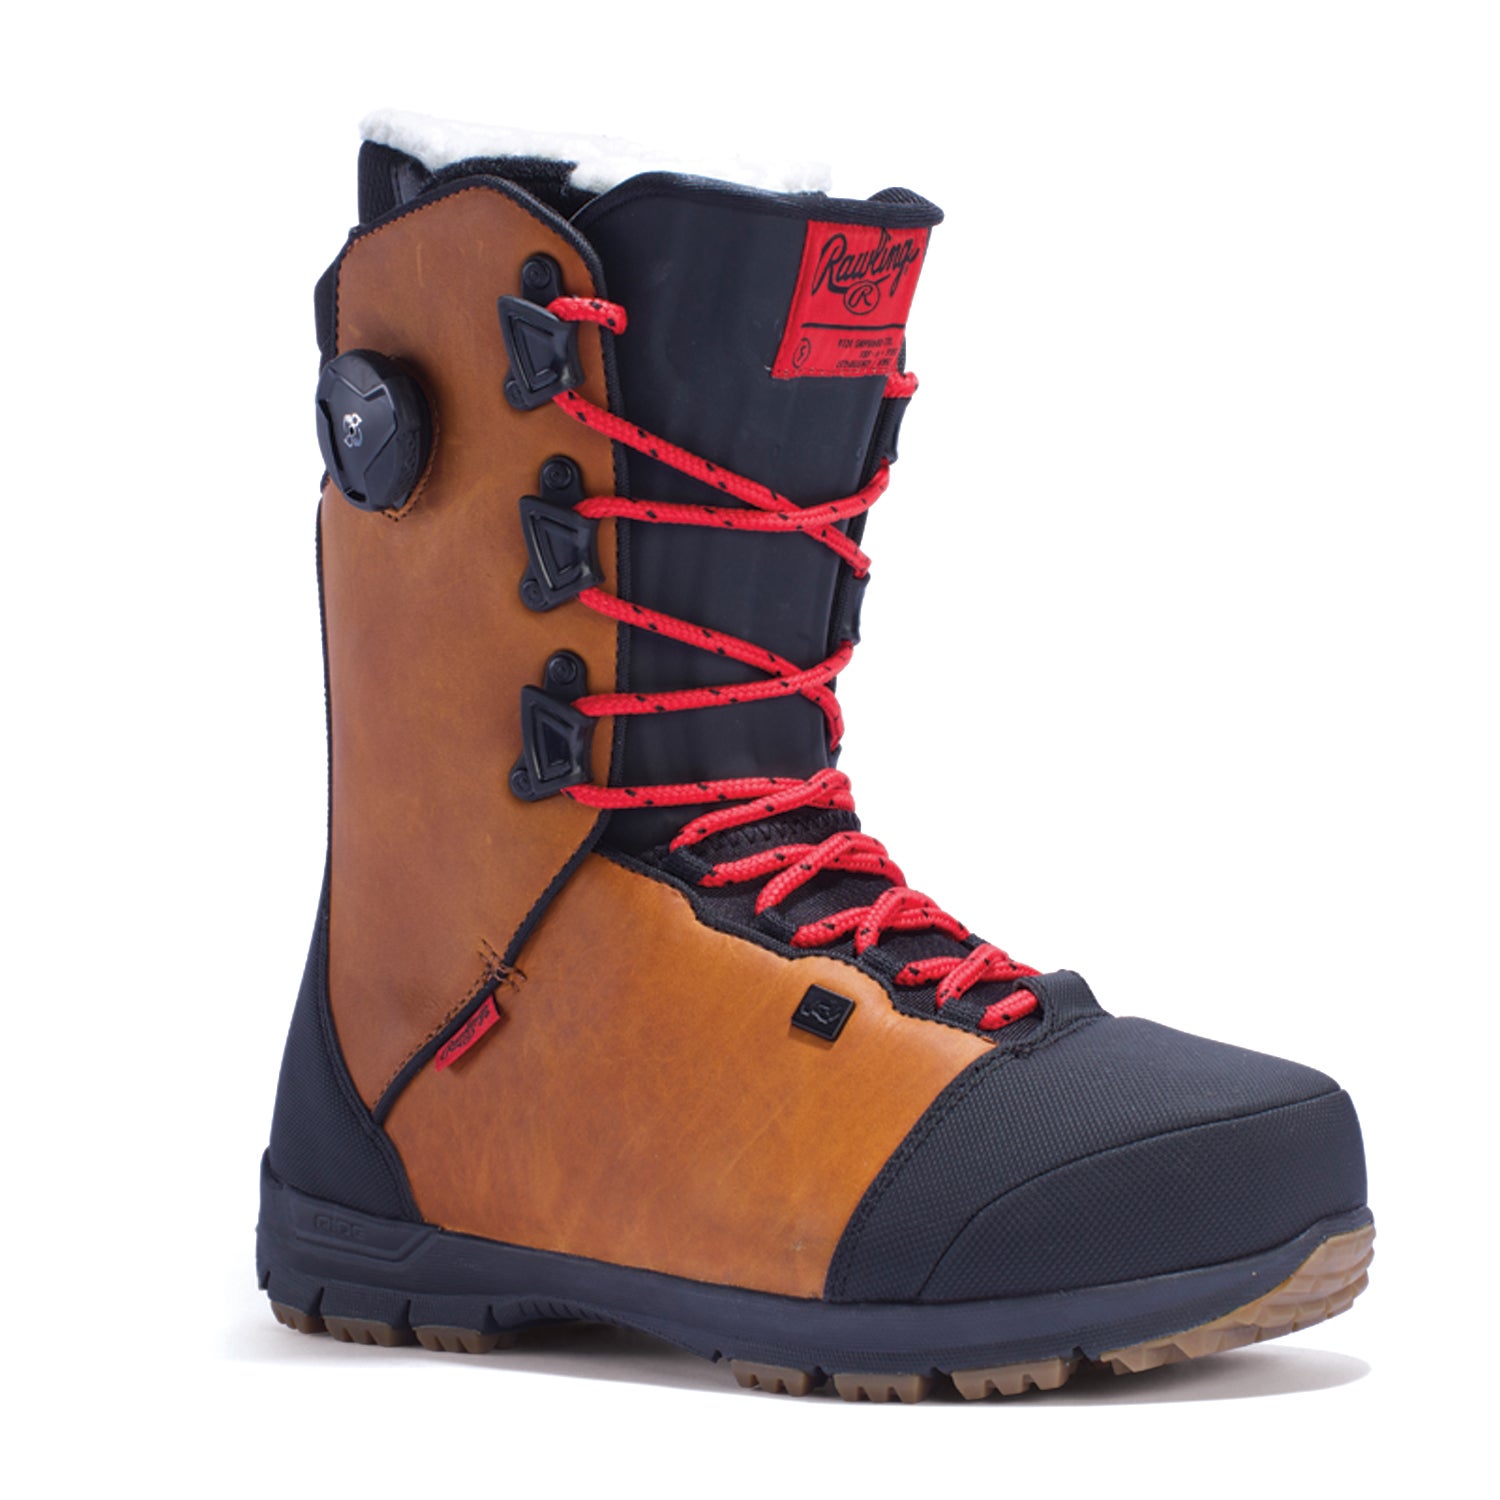 Ride X Rawlings Fuse Snowboard Boots - Outside Online